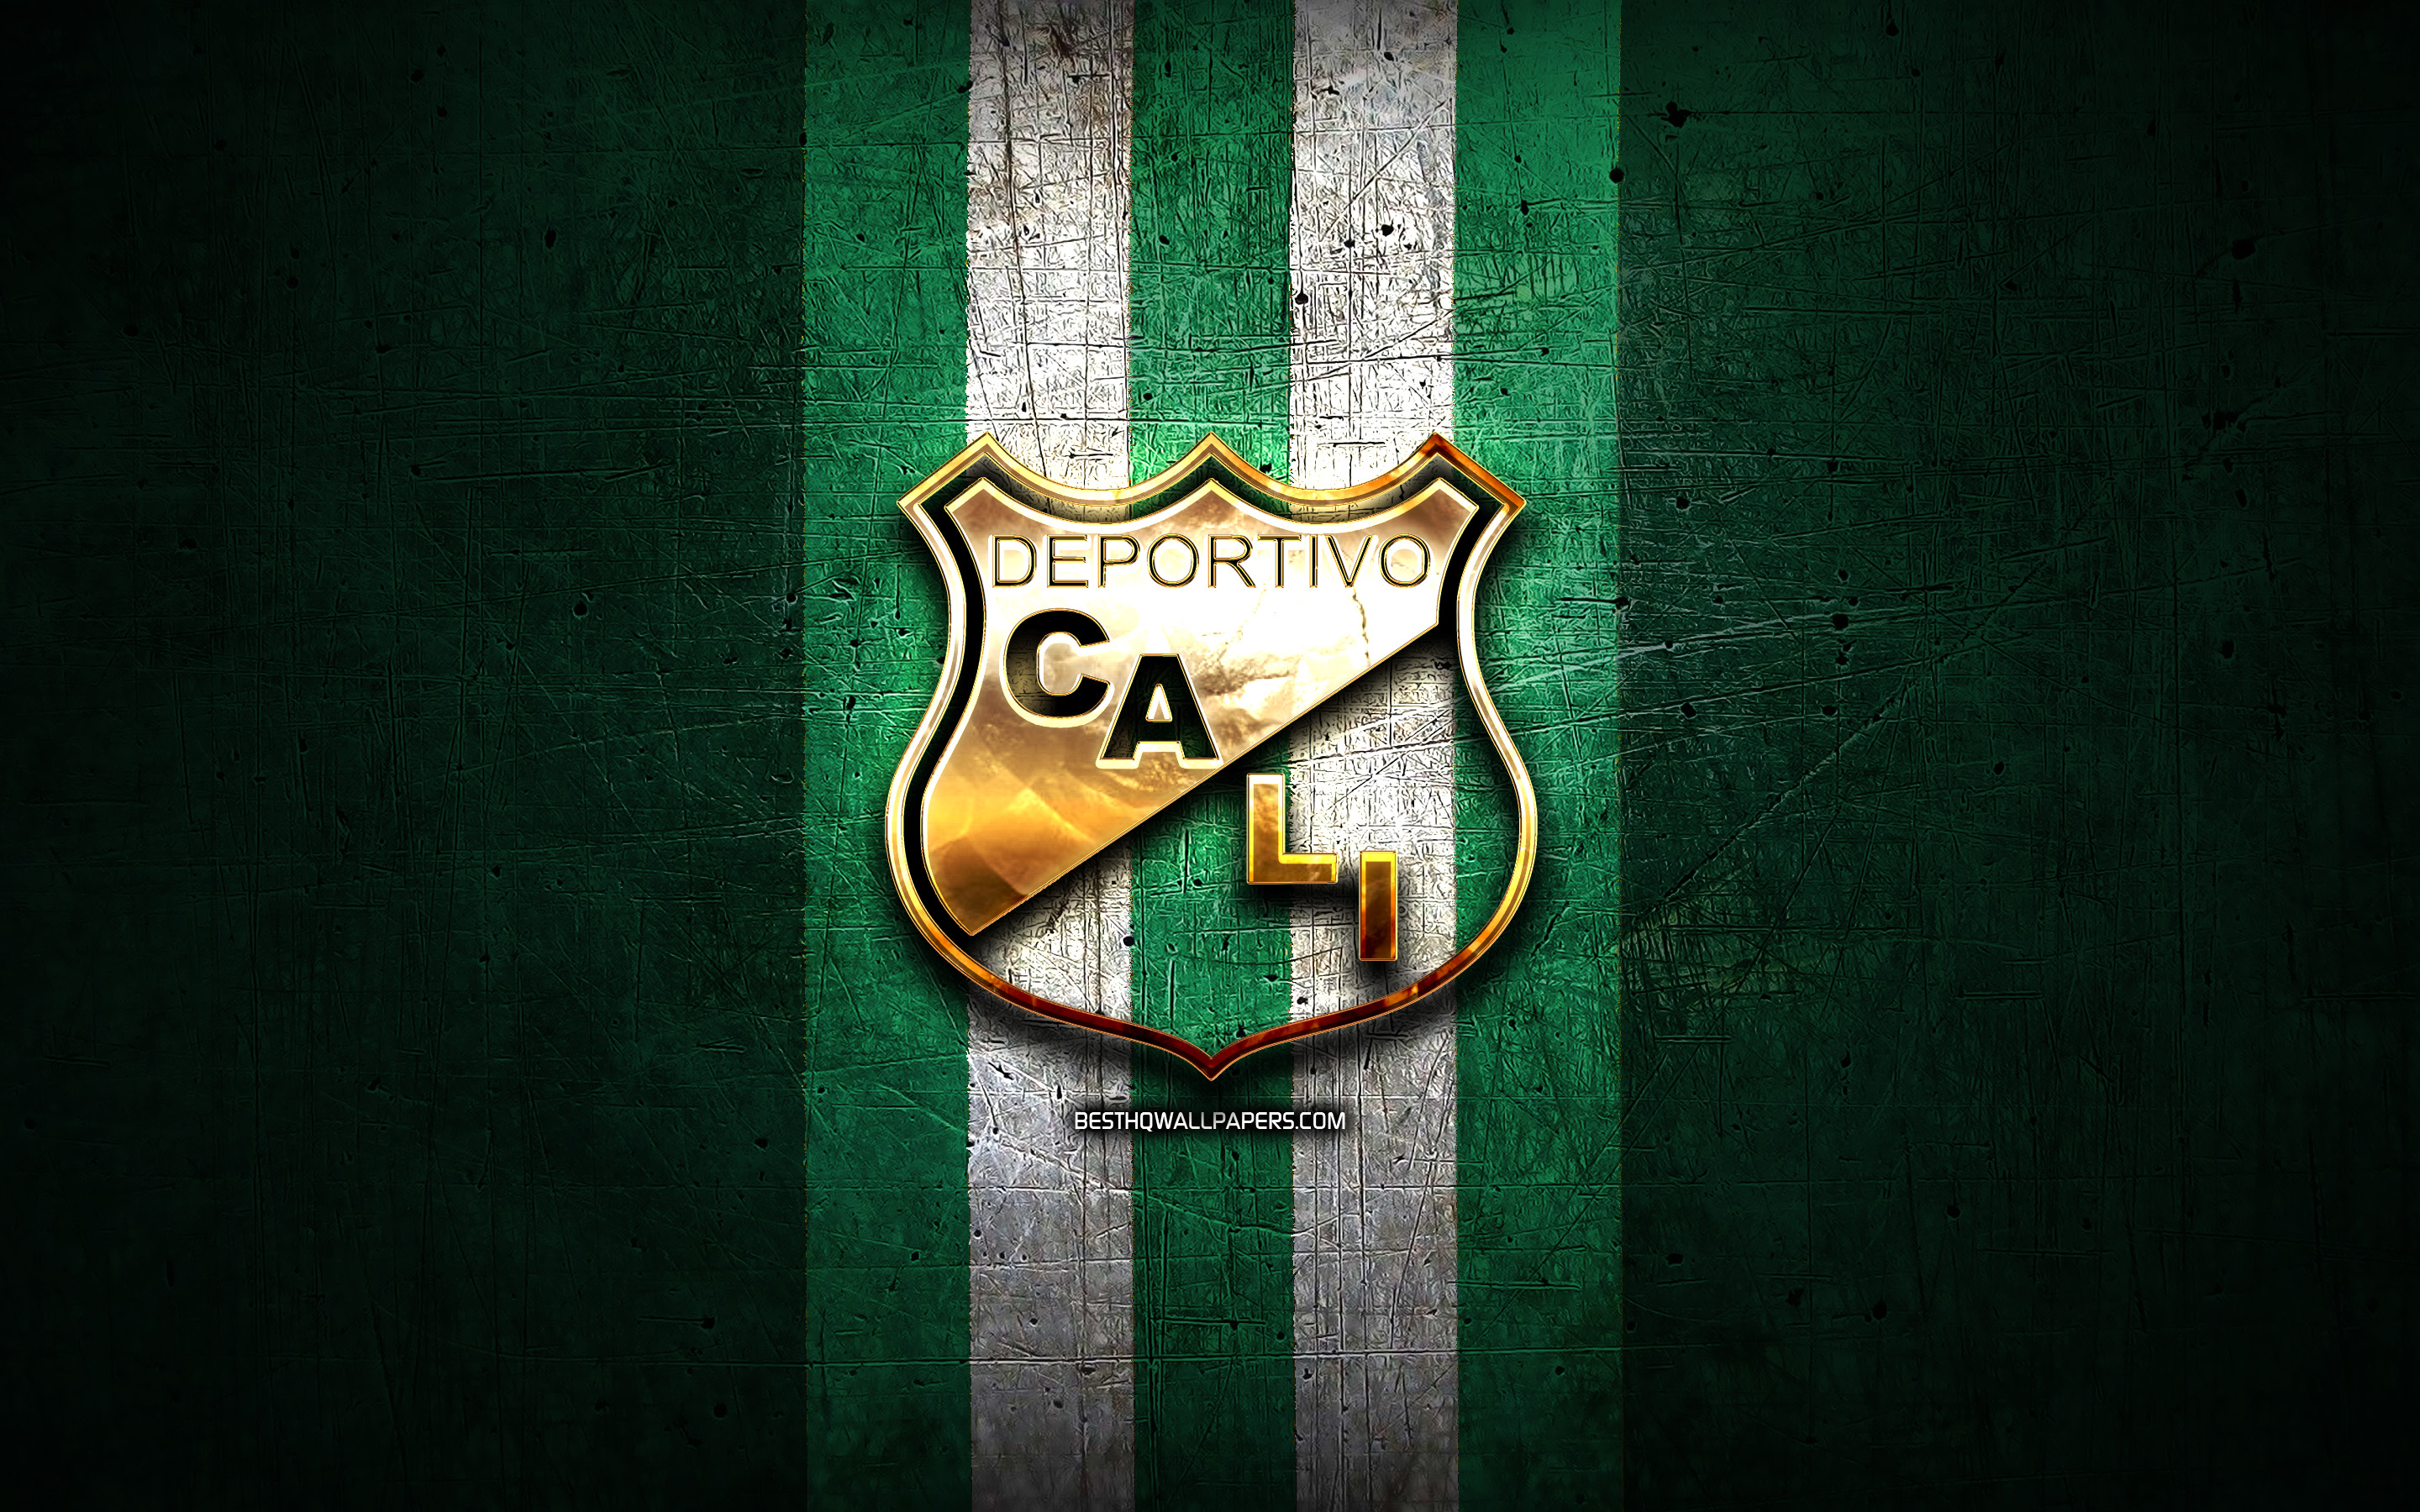 Download wallpaper Deportivo Cali FC, golden logo, Categoria Primera A, green metal background, football, colombian football club, Deportivo Cali logo, soccer, Deportivo Cali for desktop with resolution 2880x1800. High Quality HD picture